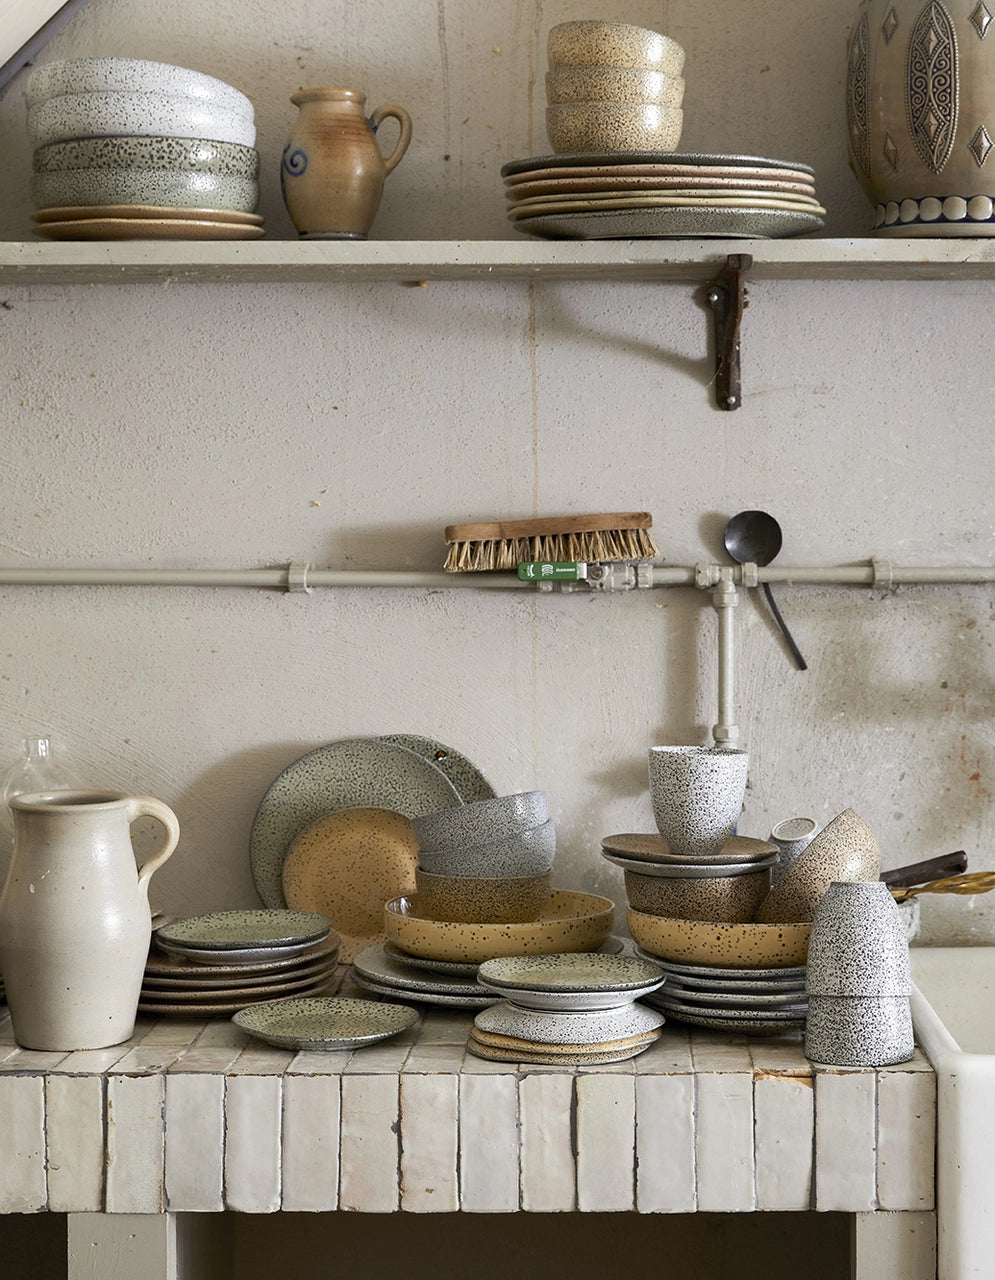 vintage style famrhouse kitchen with handmade gradient ceramic plates, bowls and mugs